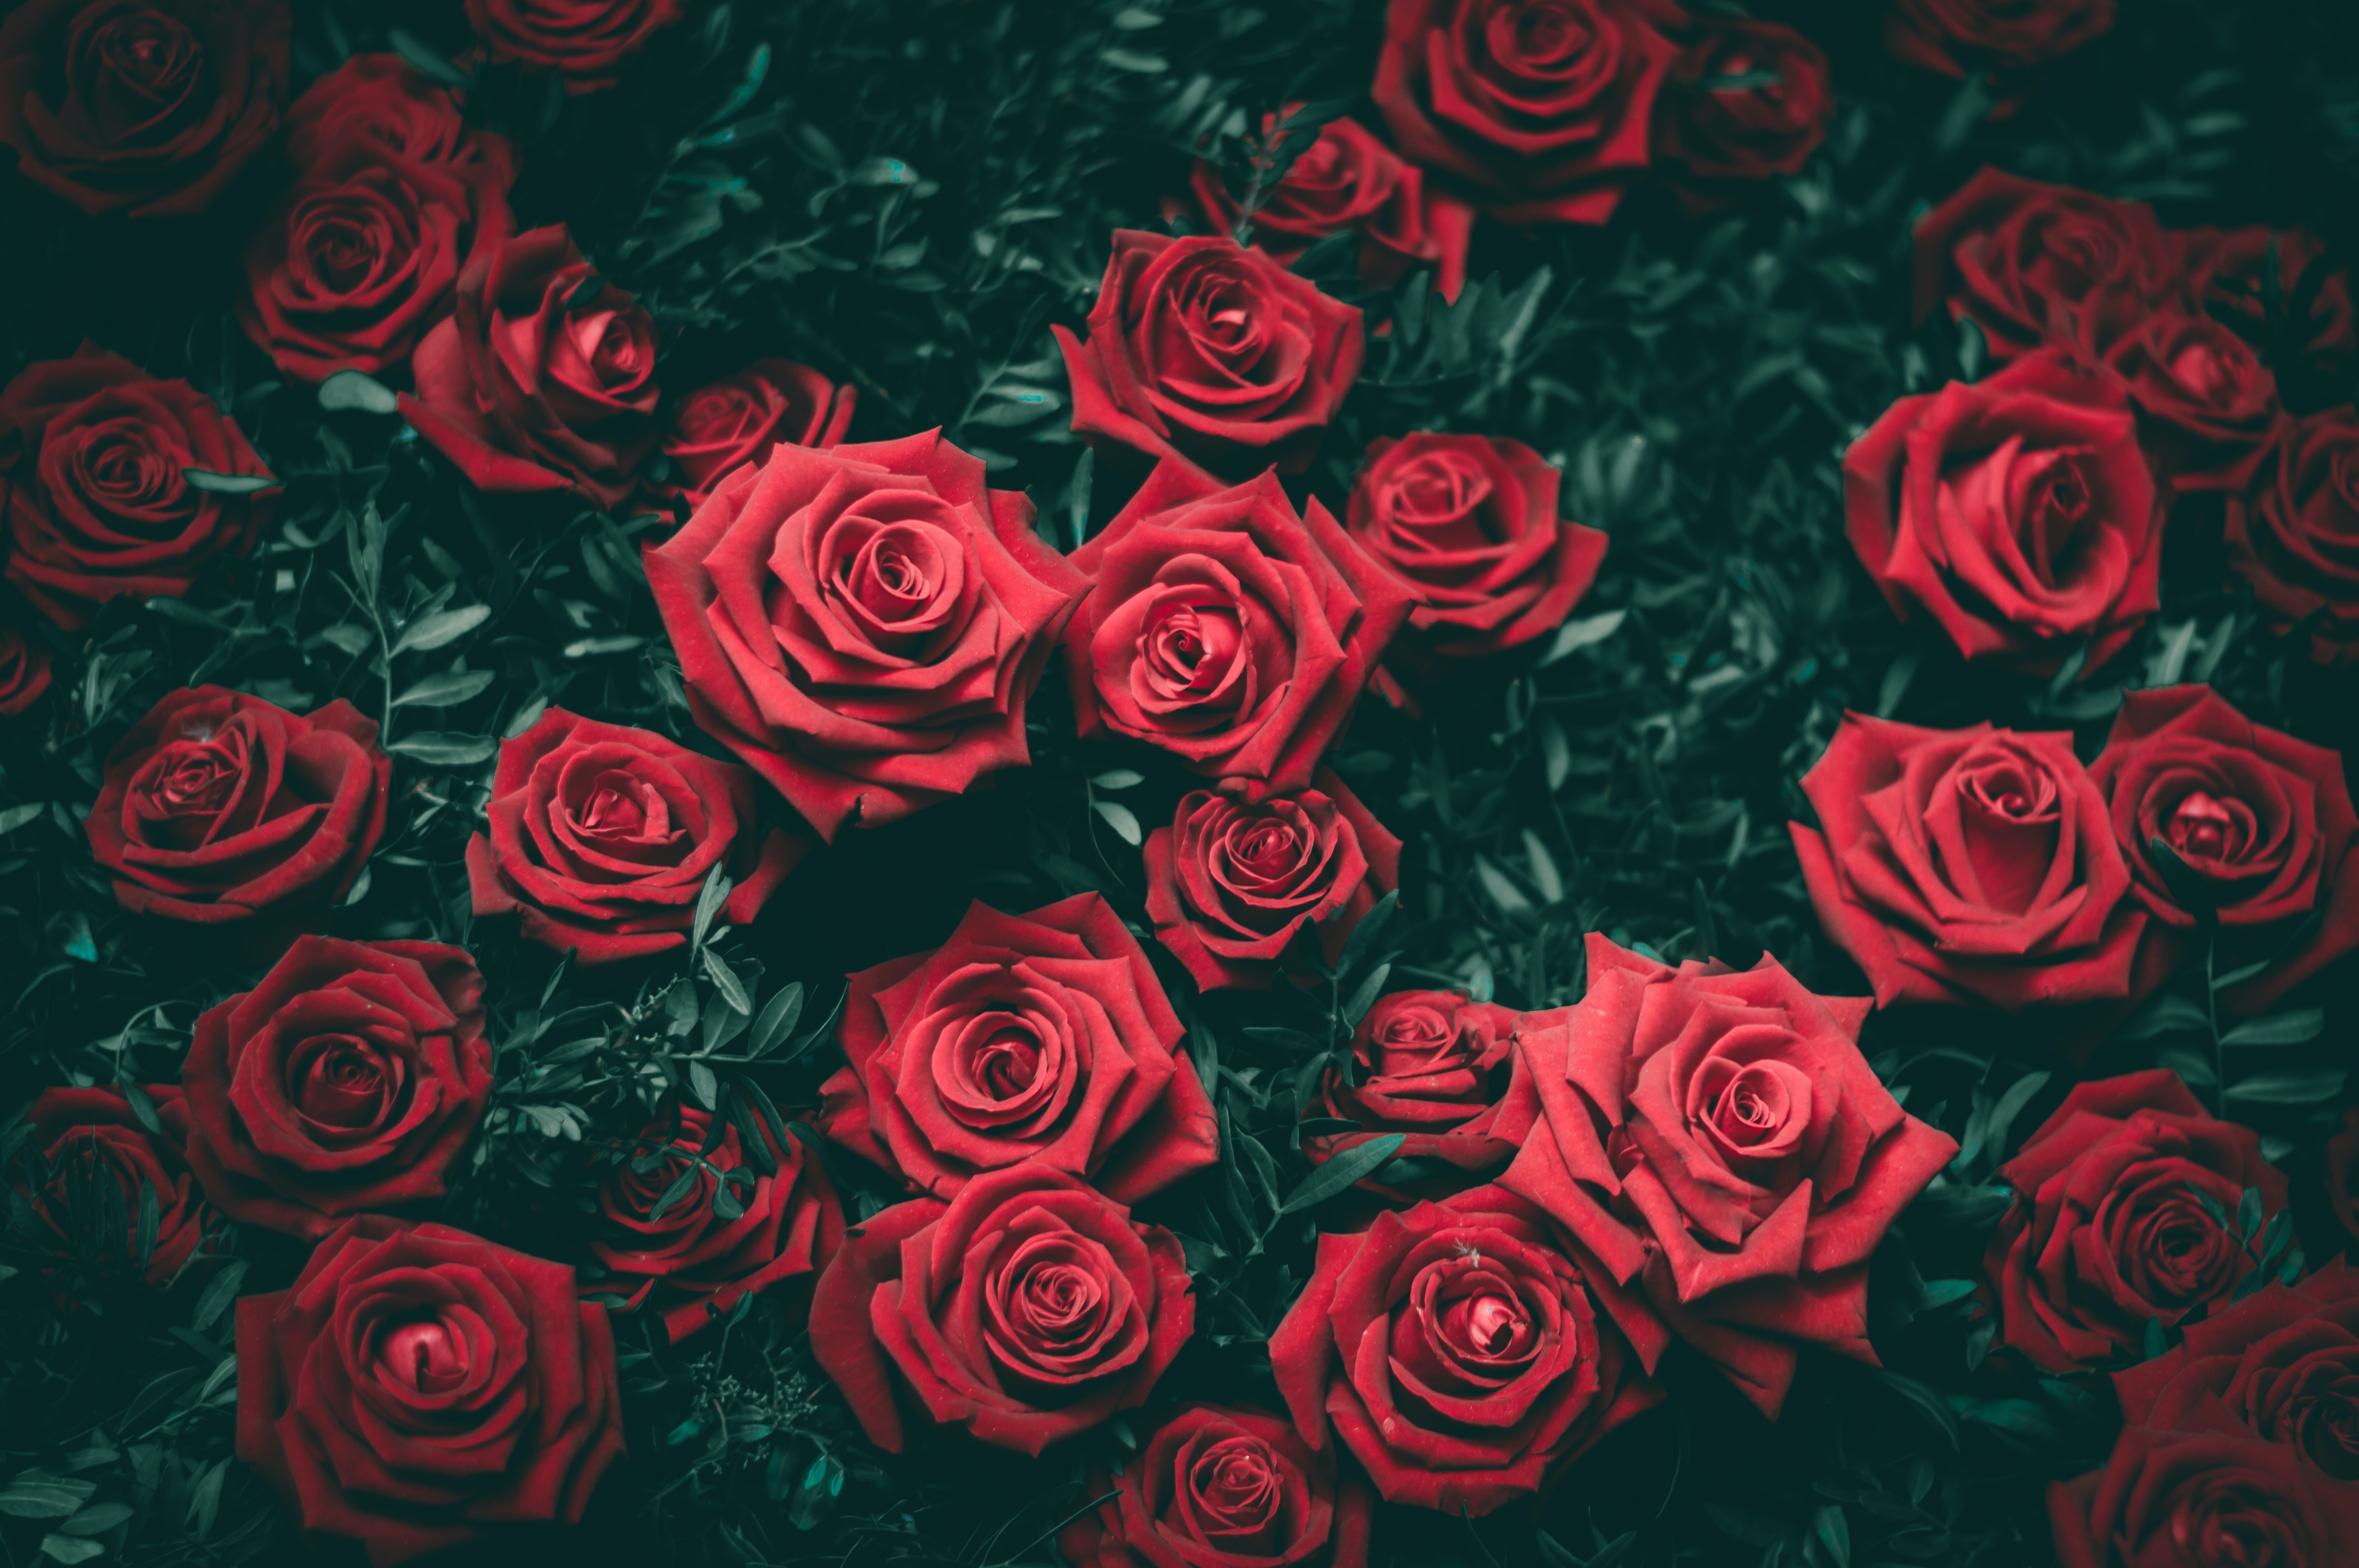 HD wallpaper, 5K, Bloom, Closeup, Blossom, Floral Background, Red Roses, Beautiful